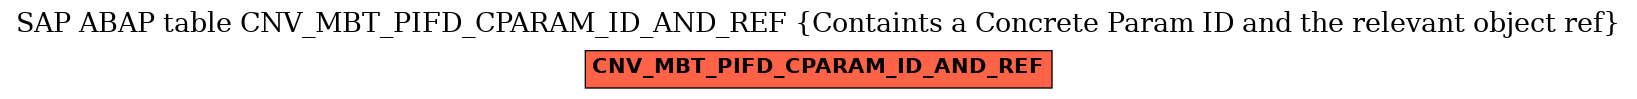 E-R Diagram for table CNV_MBT_PIFD_CPARAM_ID_AND_REF (Containts a Concrete Param ID and the relevant object ref)